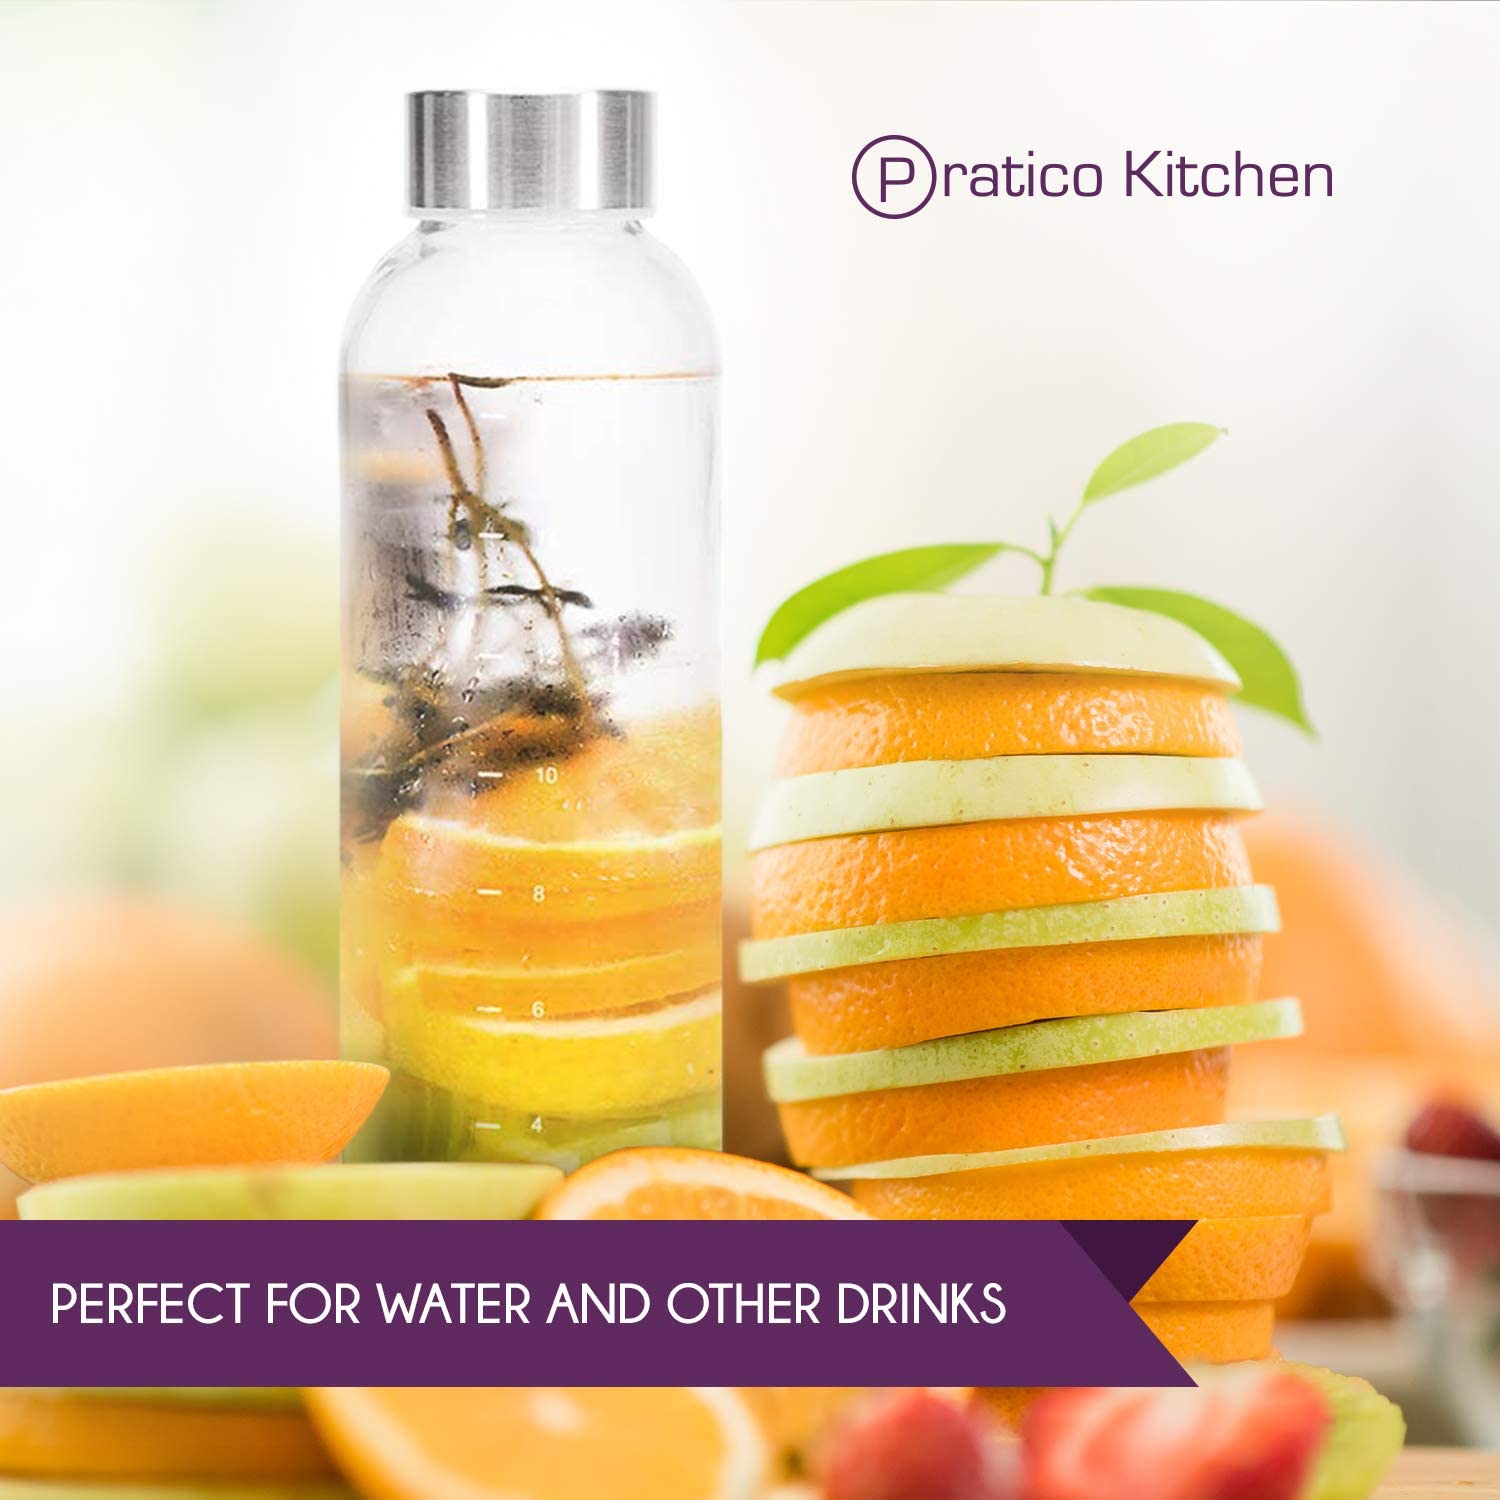 pratico Kitchen 20 oz. Leak-Proof Glass Bottles, Juice Containers and Smoothie Bottles, Stainless Steel Caps, 4 Pack